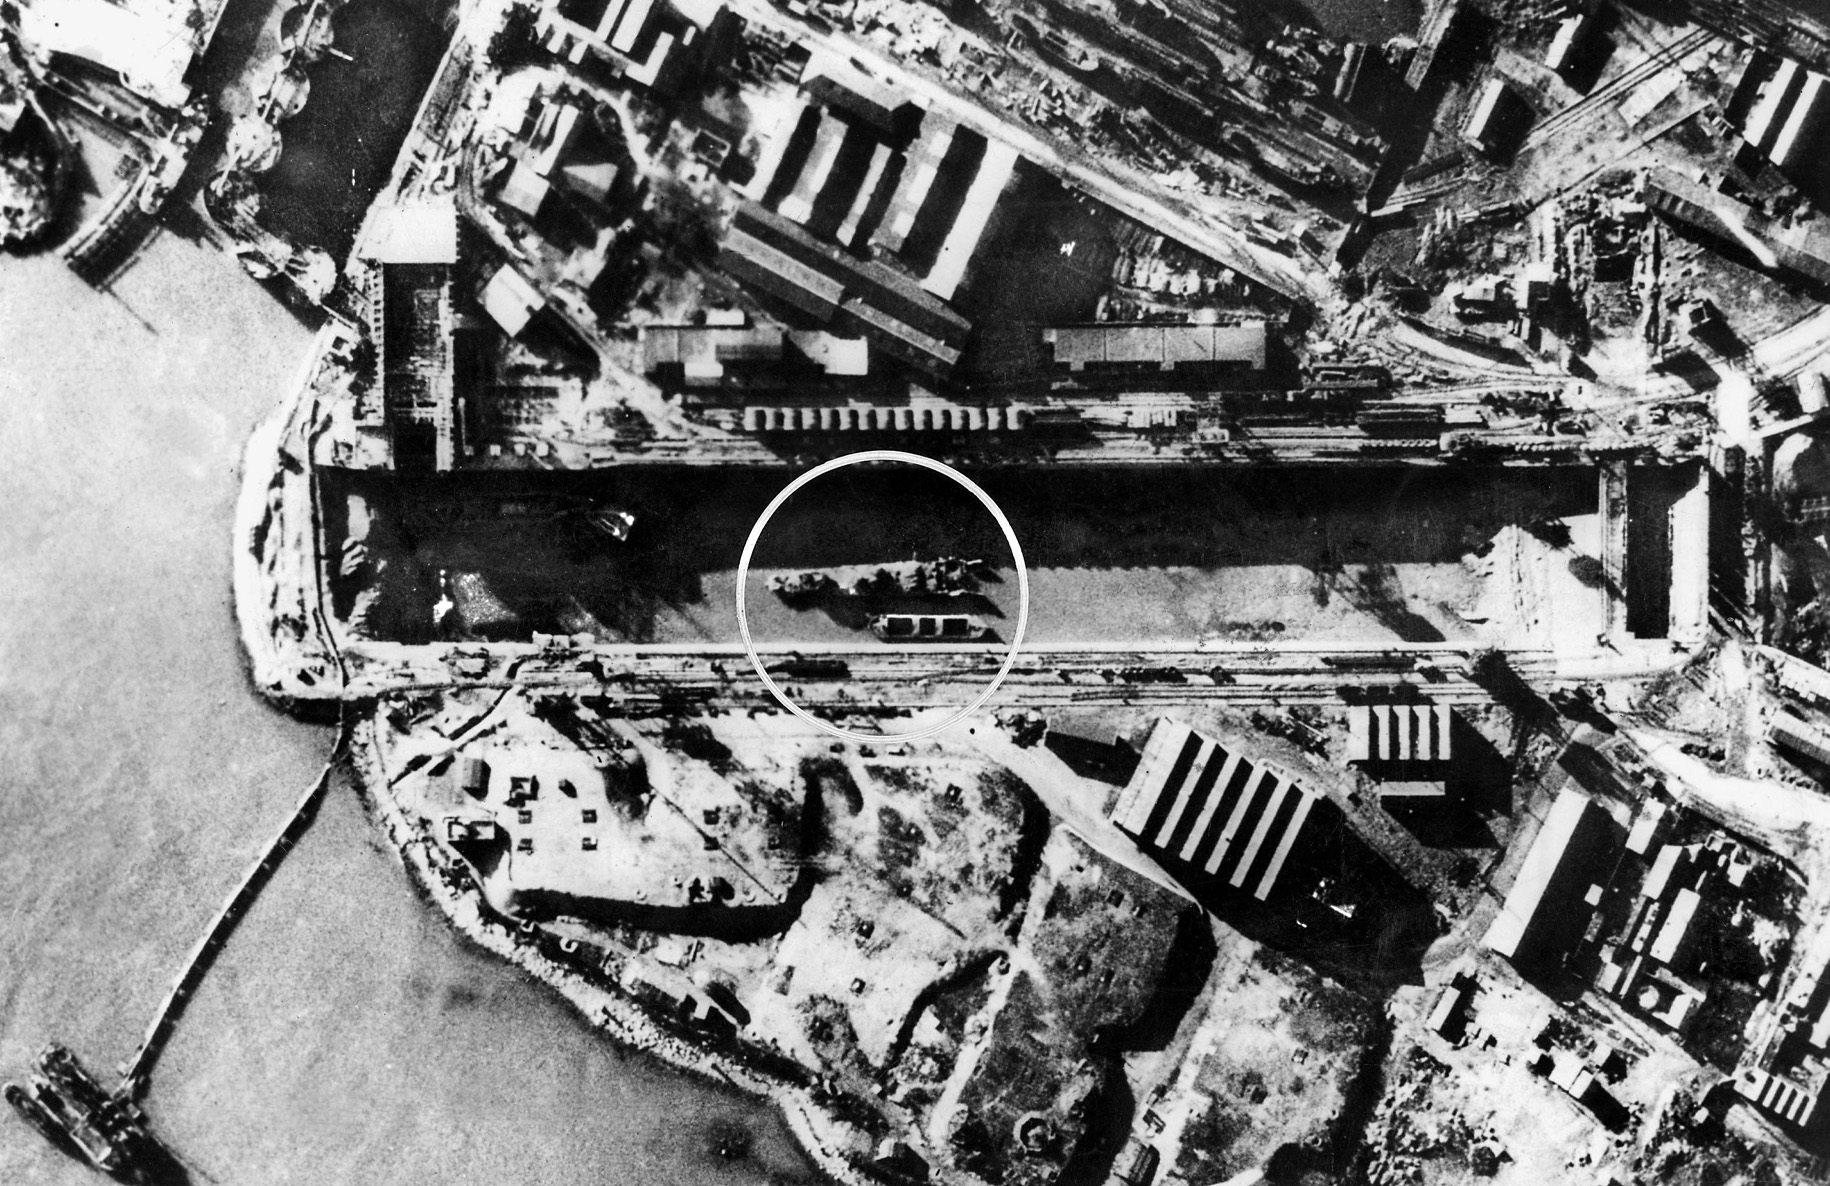 Aerial photo taken months after the raid shows the stern half of HMS Campbeltown (circled) lying on the bottom of the drained Normandie dry dock. Although the lock gate was repaired, the dry dock remained useless for the rest of the war, preventing its use by Germany’s largest warships.